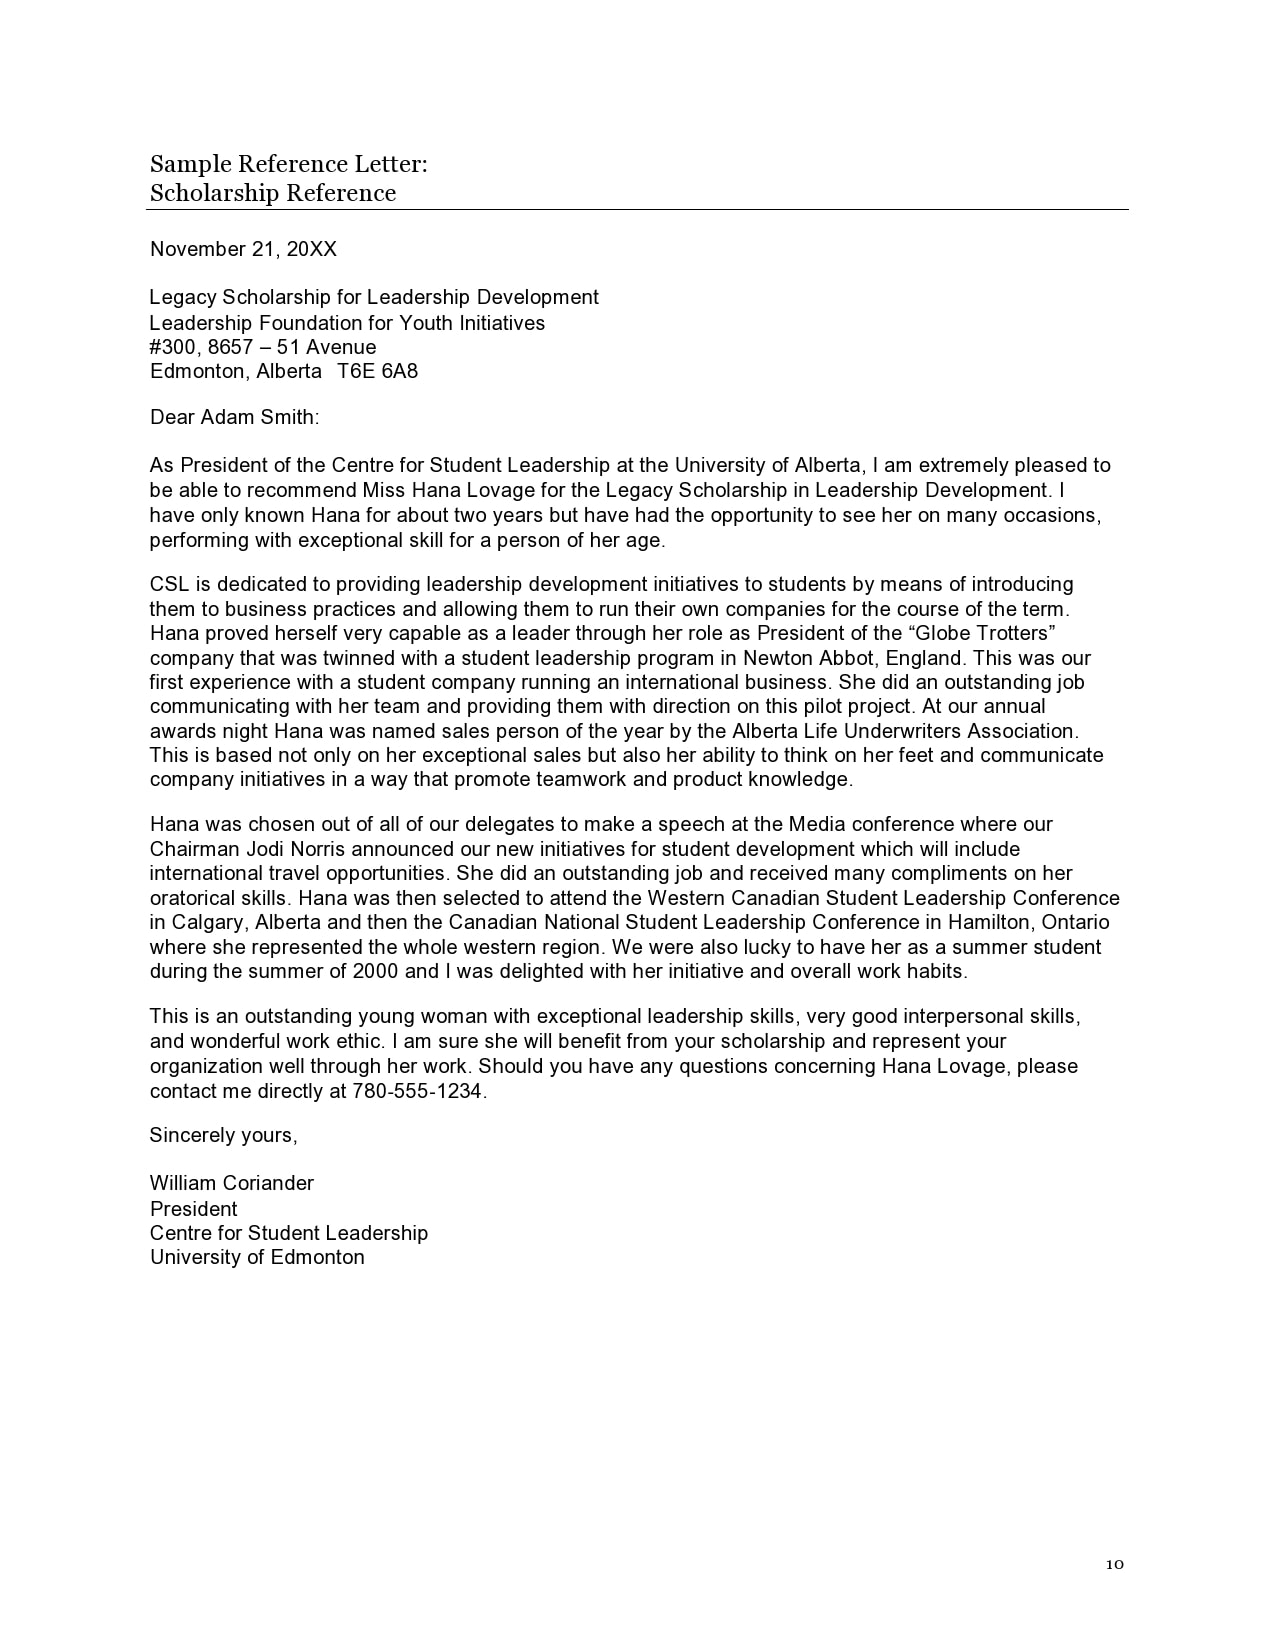 Sample Recommendation Letter For Scholarship from templatearchive.com